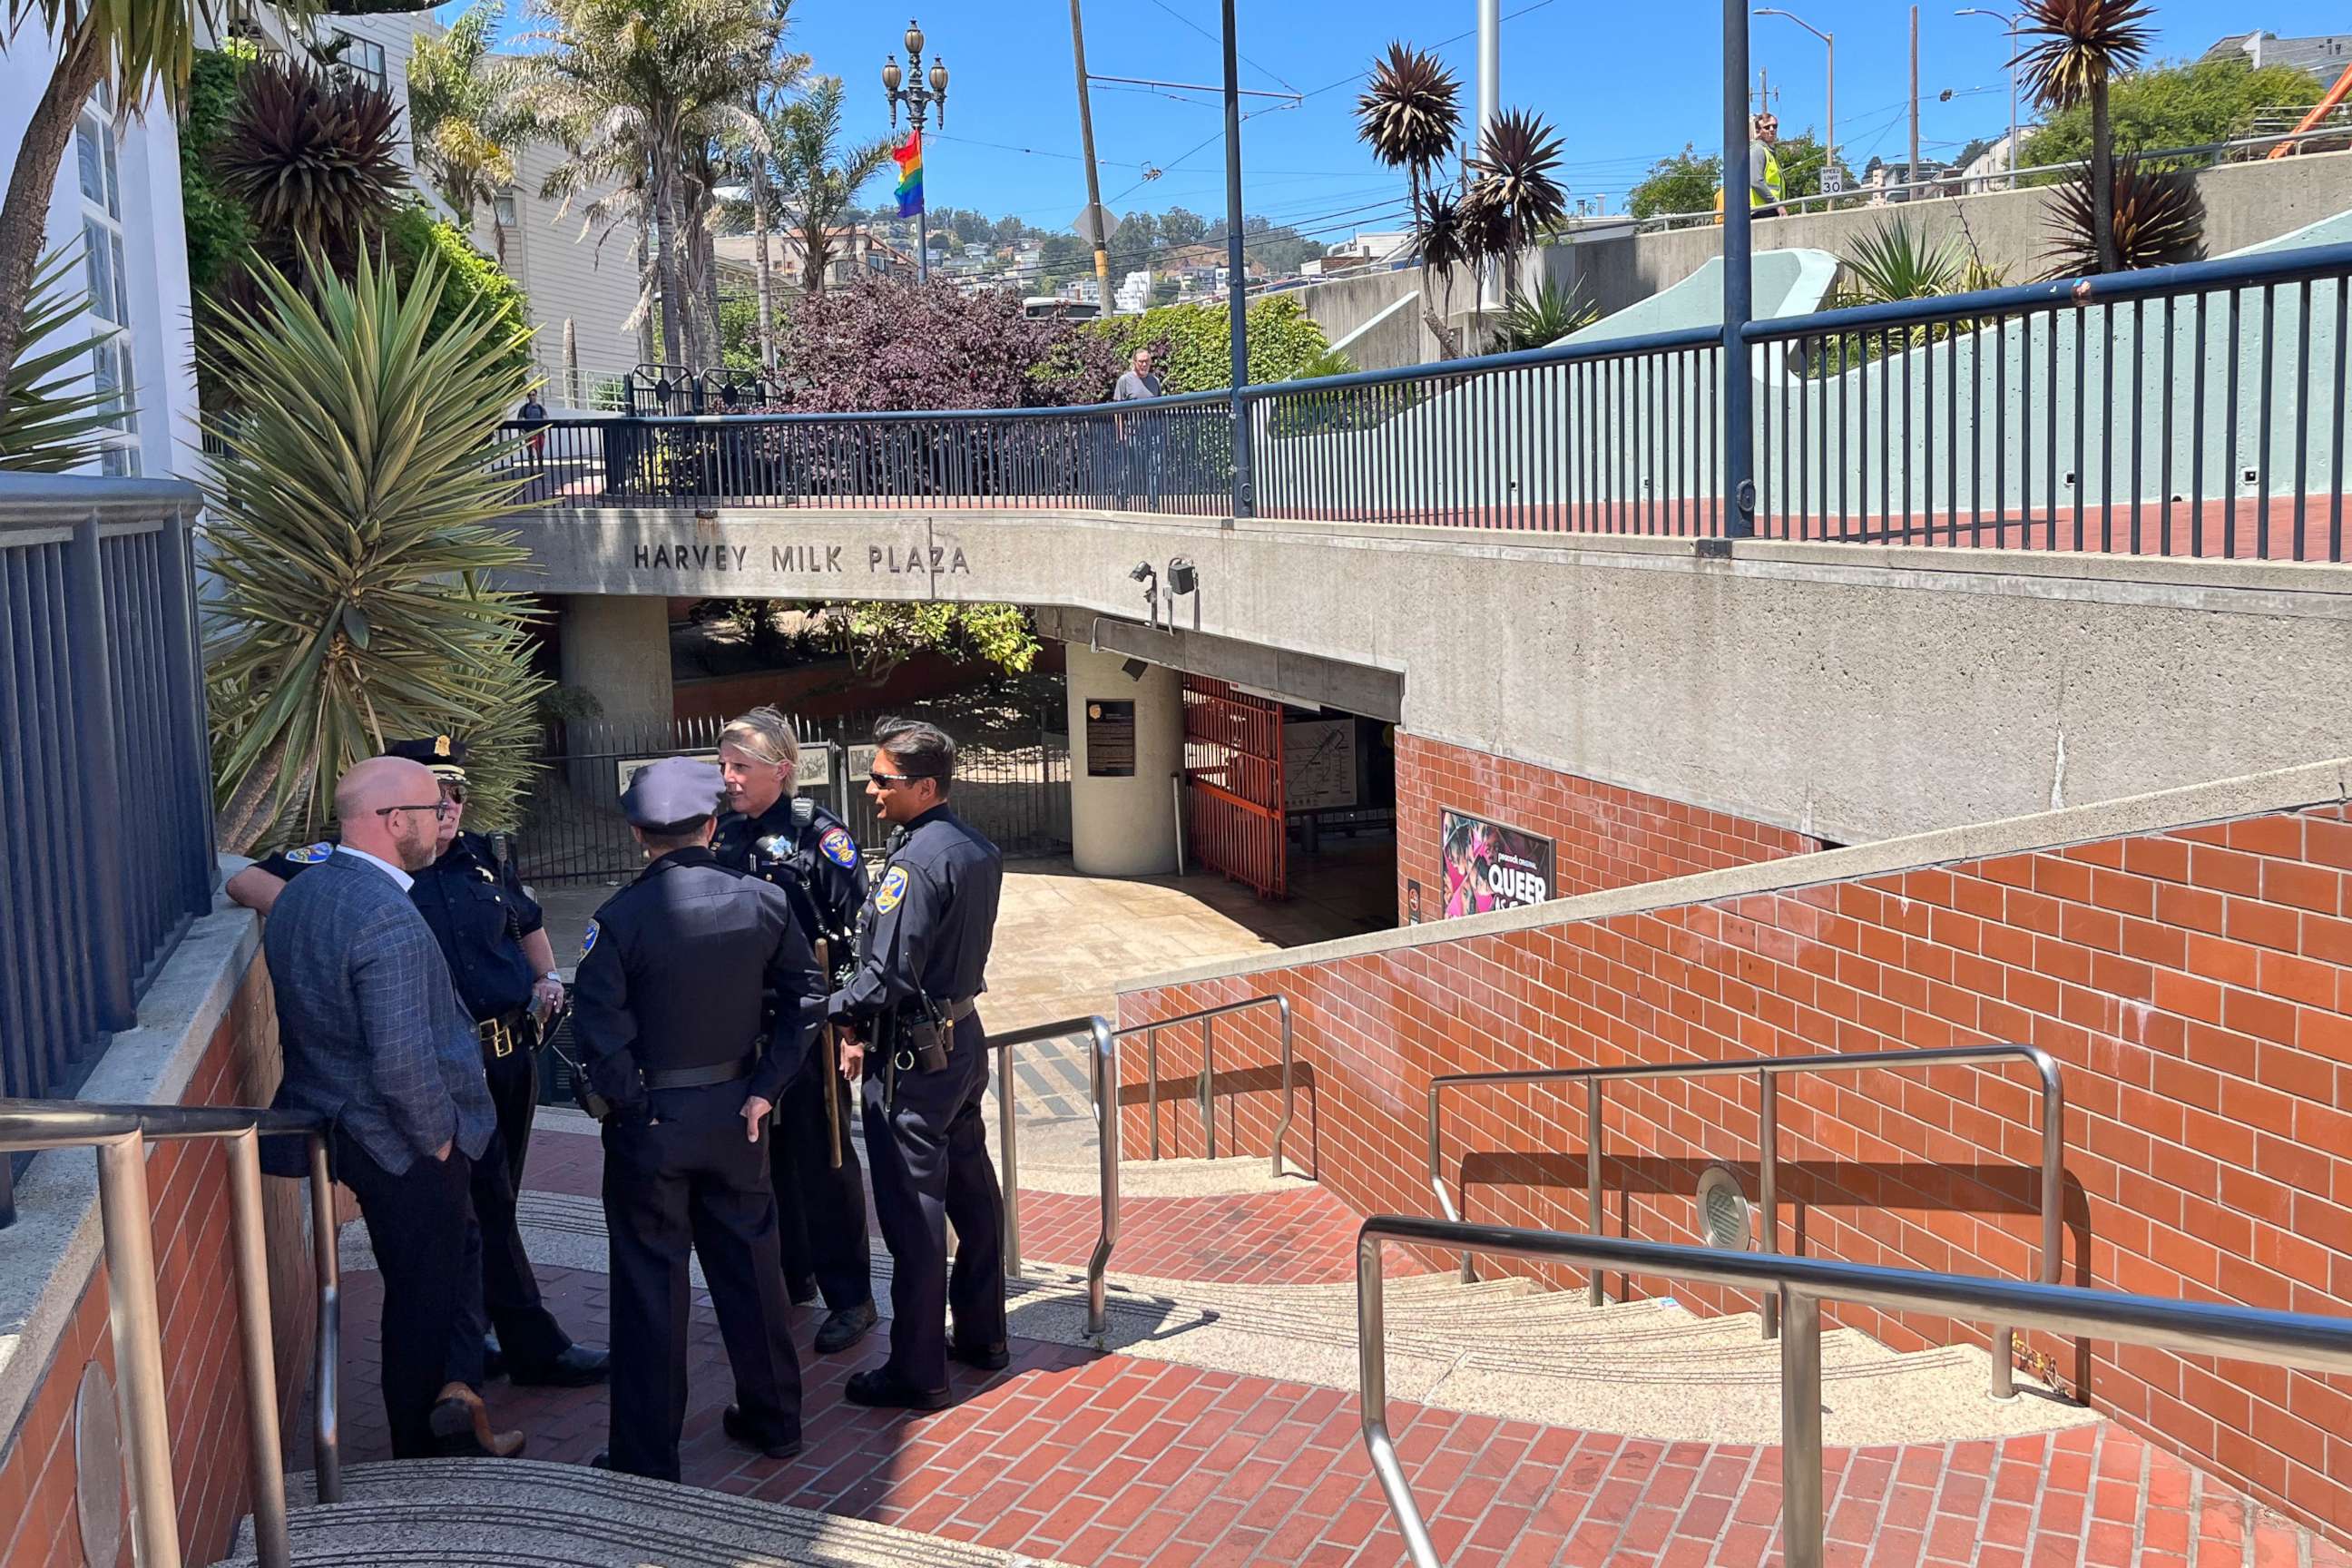 PHOTO: Police personnel confer outside the entrance to the Castro Muni Metro station following a shooting in San Francisco, June 22, 2022.